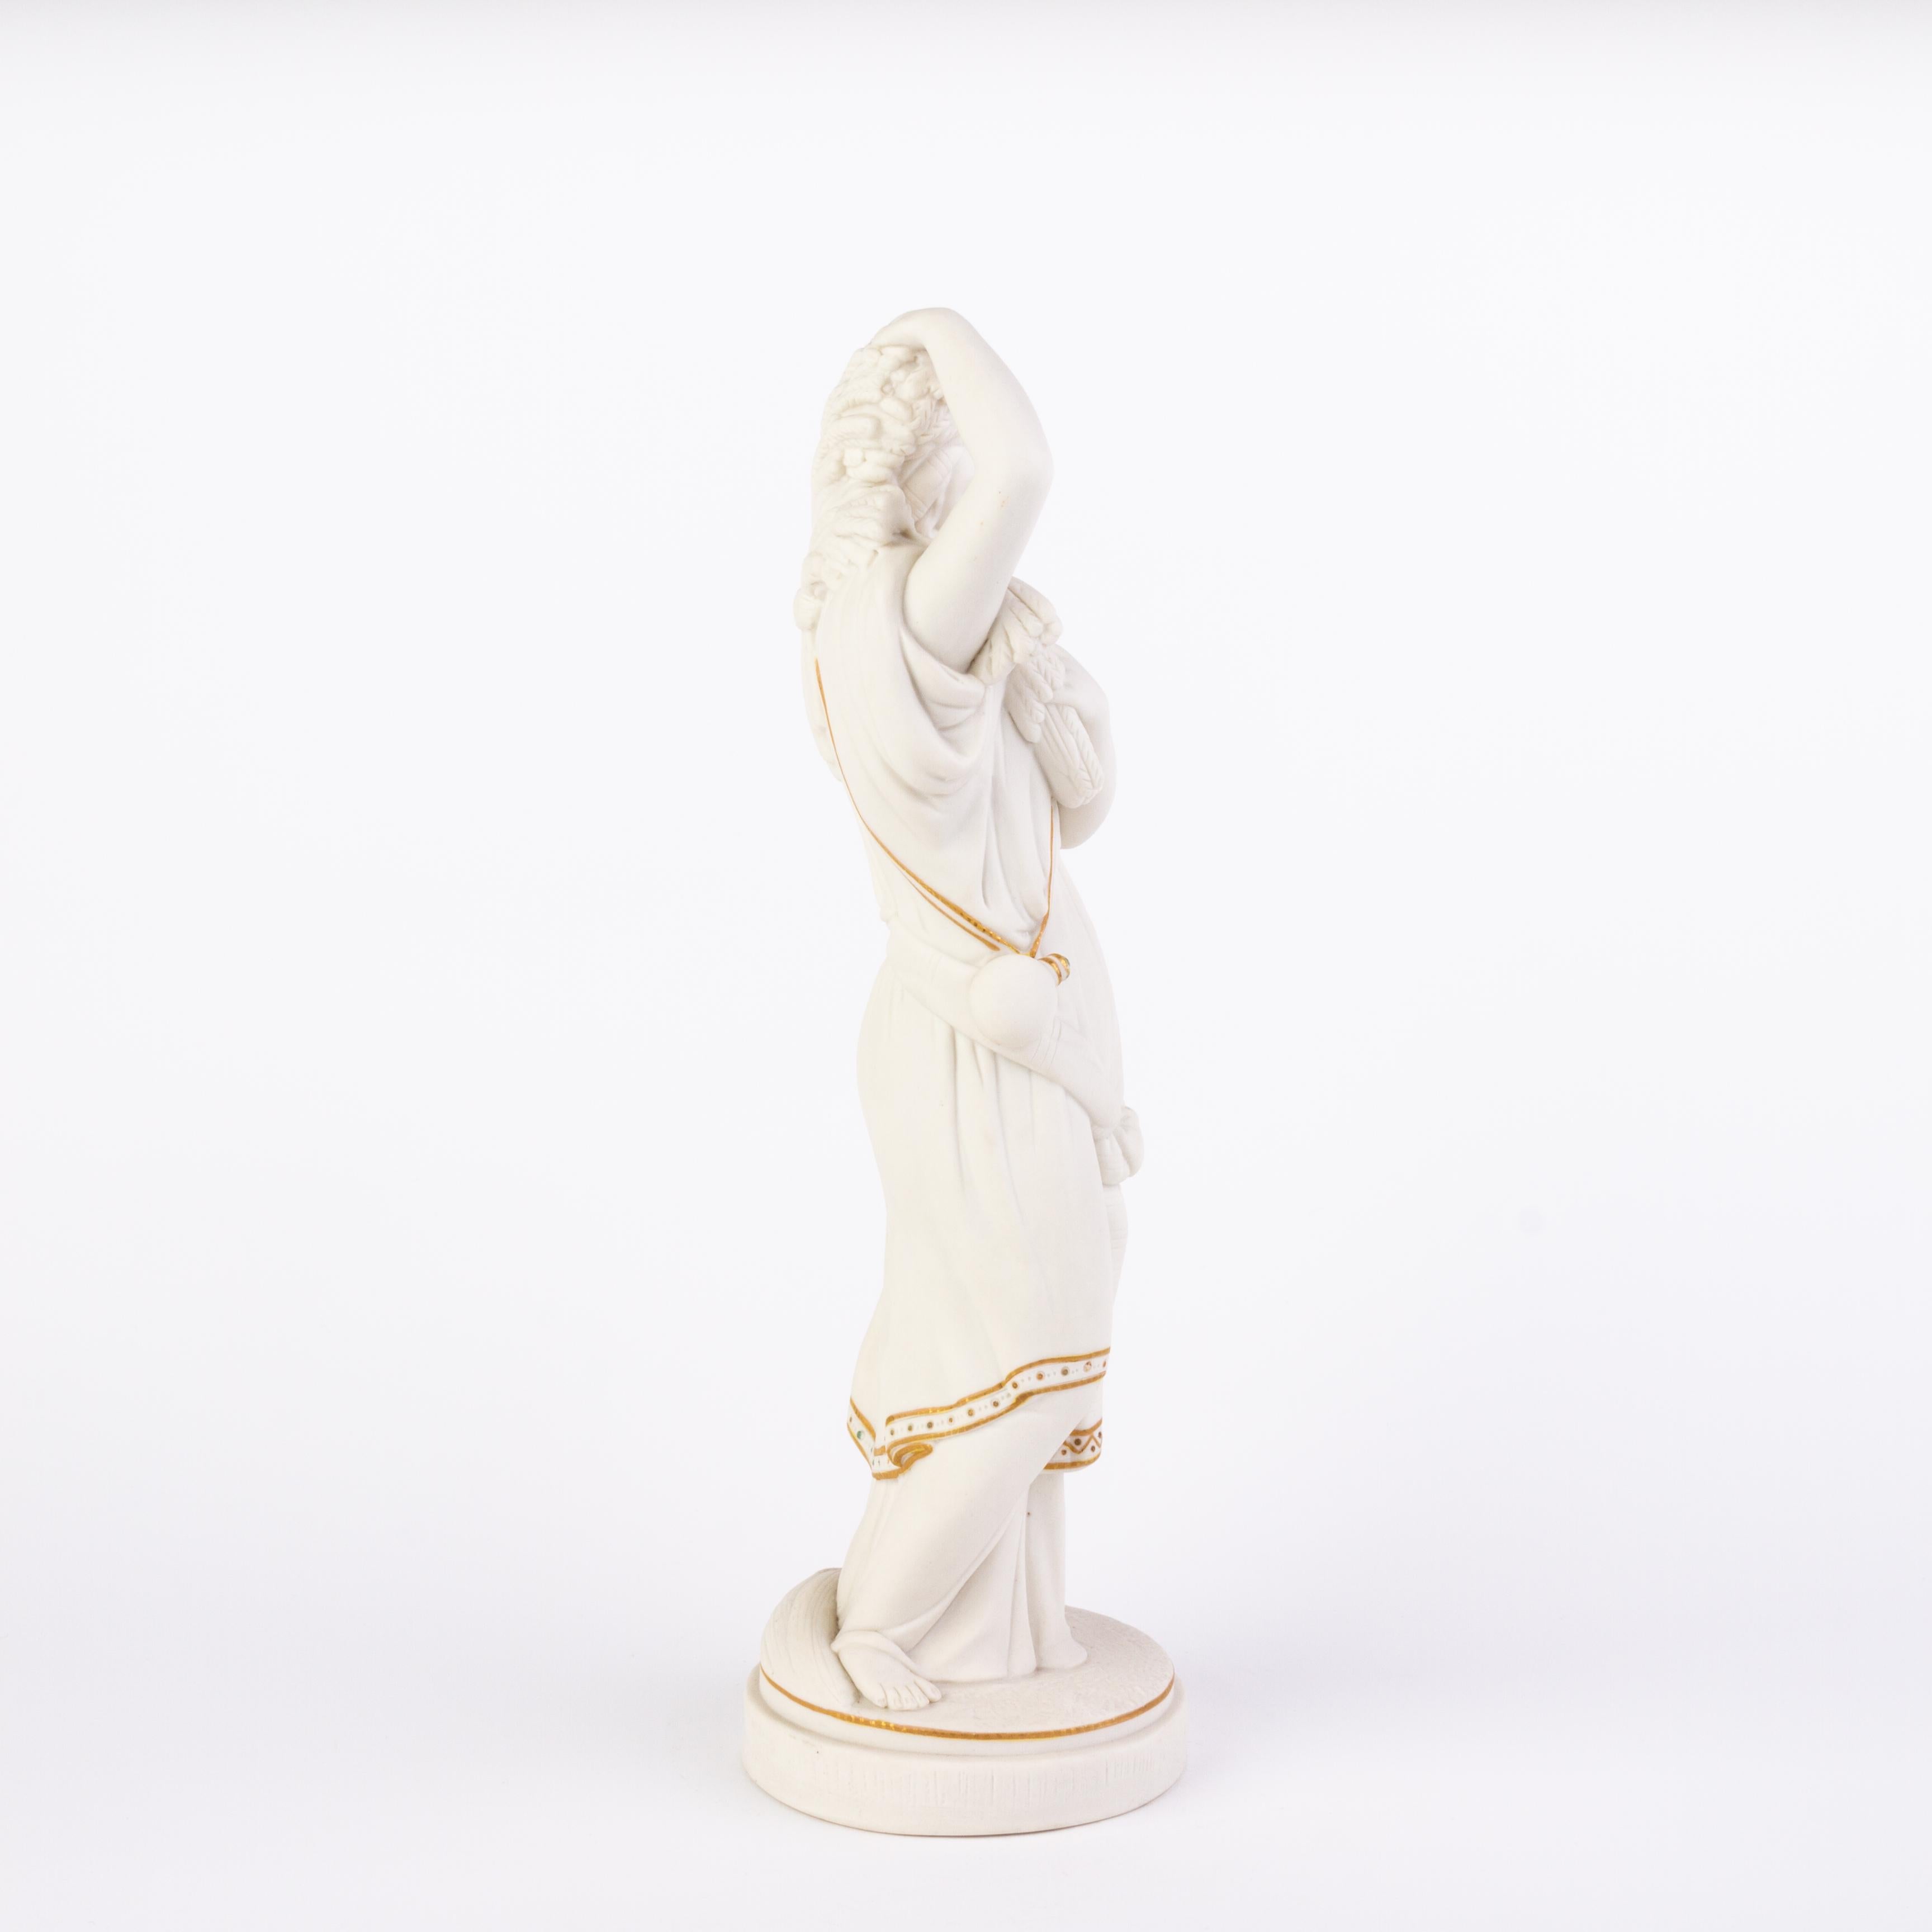 English Victorian Copeland Parian Ware Statue of Autumn 19th Century
Good condition
From a private collection.
Free international shipping.